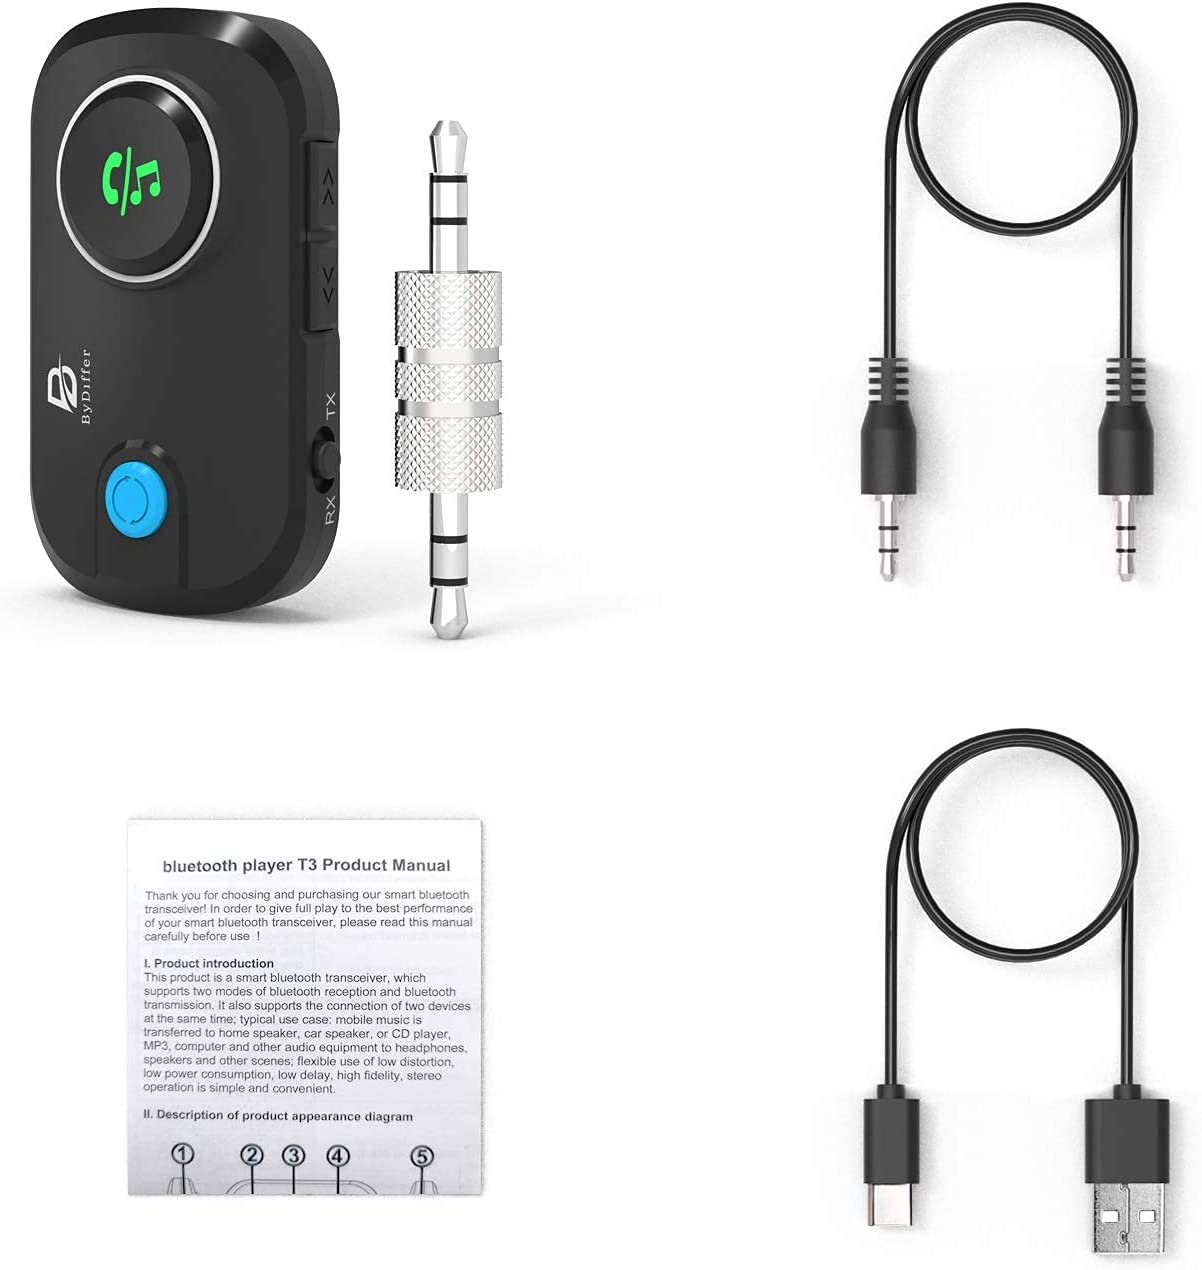 ByDiffer Dual Link Bluetooth 5.0 Audio Transmitter Receiver Sharing for up  2 Headphones, 3 in 1 Low Latency Wireless Adapter Splitter for TV Airplane